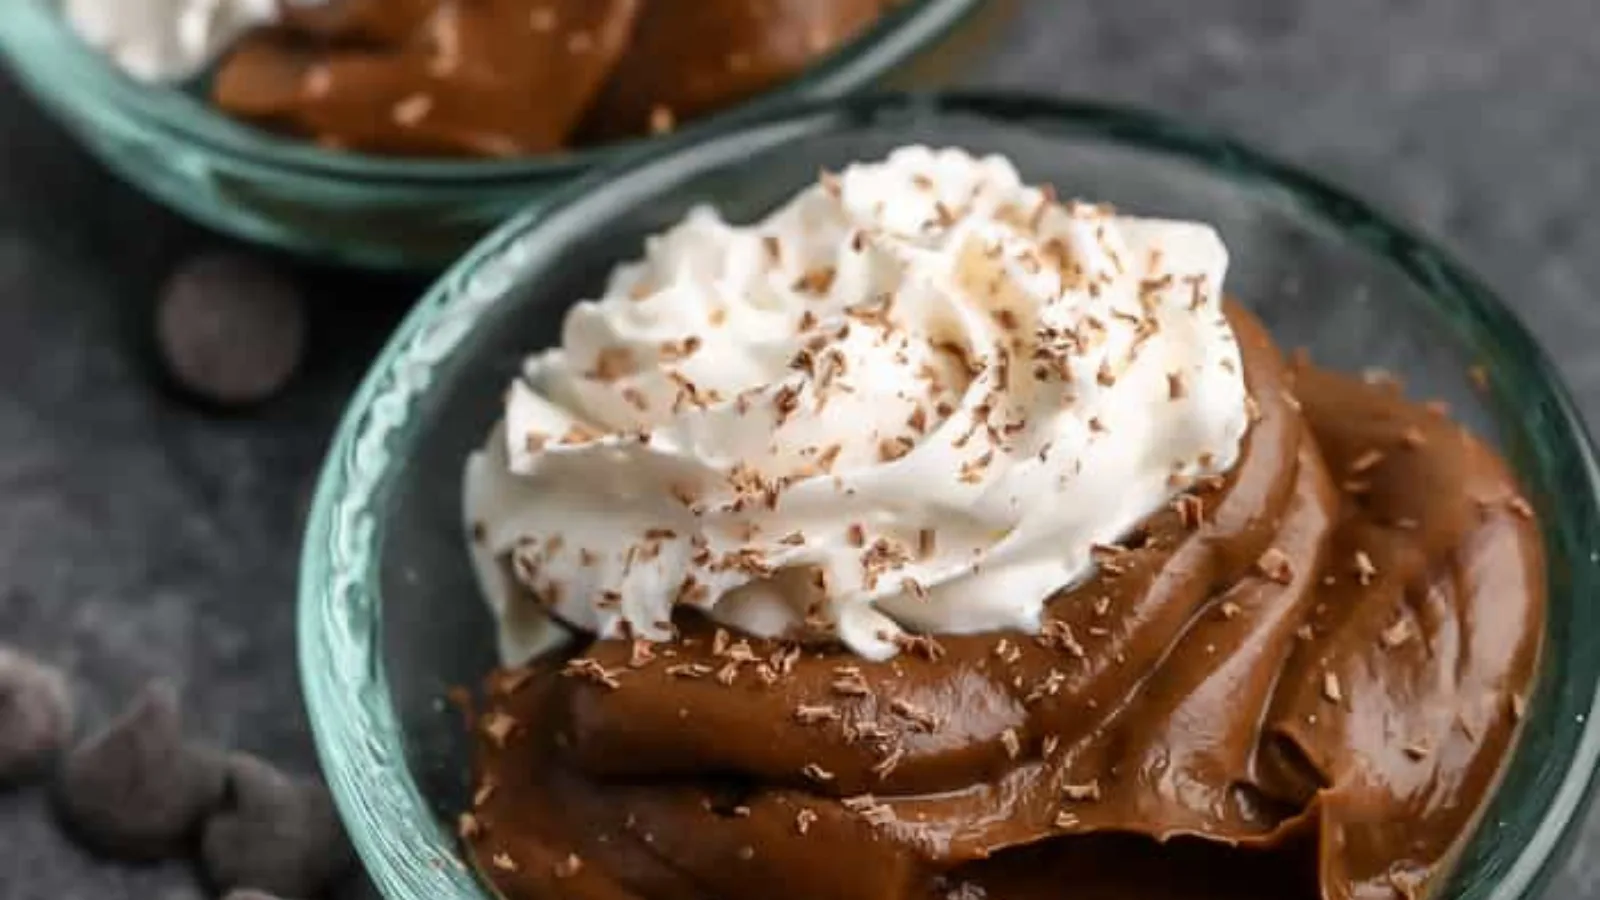 Bowls of chocolate pudding made with avocado and topped with whipped cream.